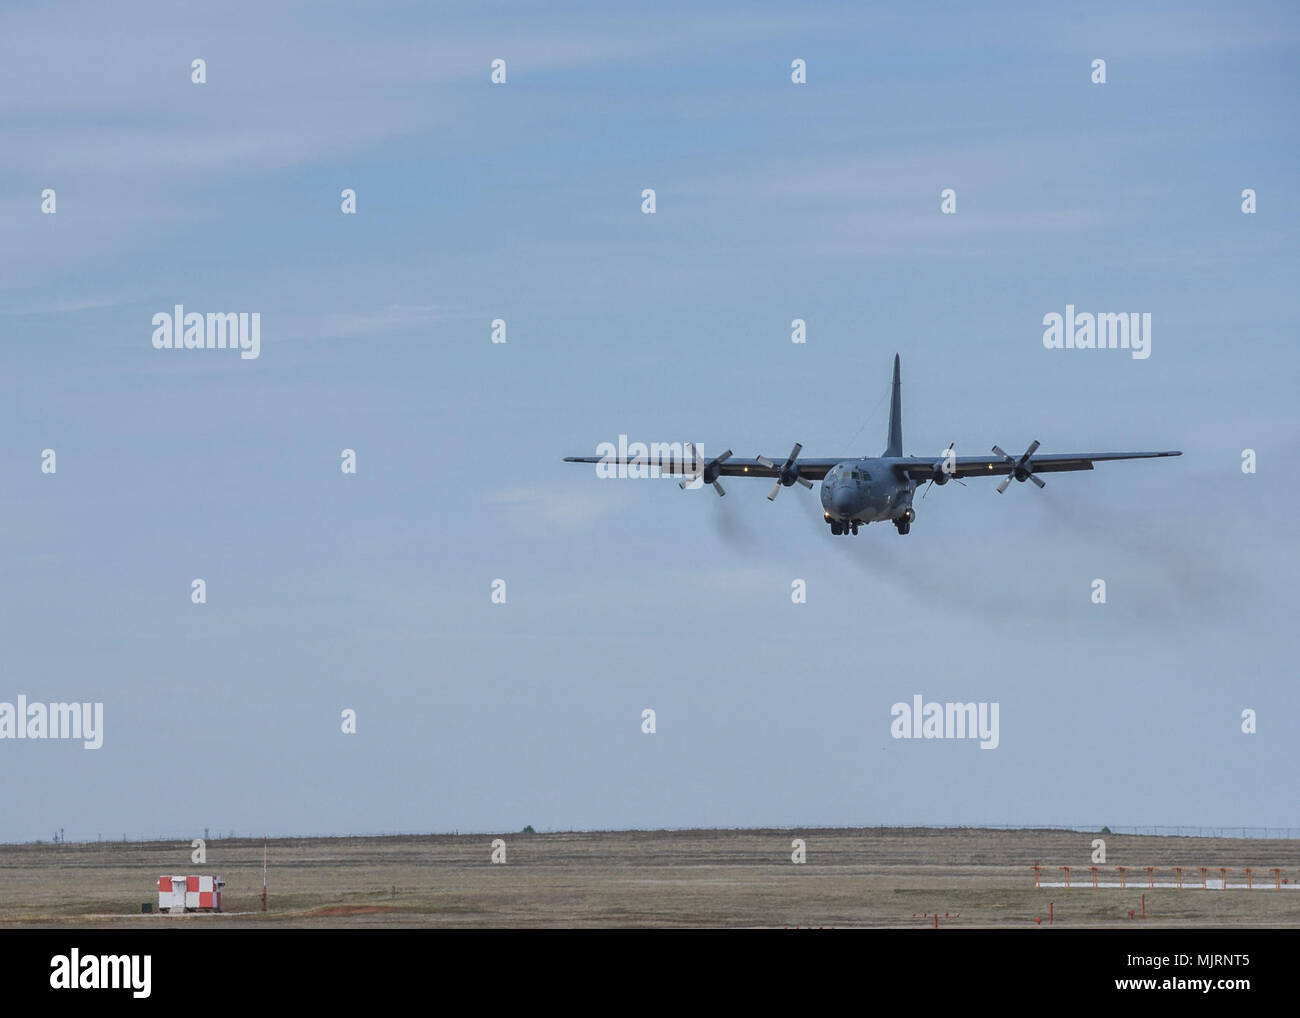 A Lockheed MC-130P Combat Shadow prepares to land at Sheppard Air Force Base, Texas, March 21, 2018. This particular MC-130 was has been in service since 1975. The aircraft's days of flying rescue missions and snagging film canisters jettisoned from satellites are over now though. Now it will be used as a tool for future crew chief and armament Airmen to hone their skills. Armed Forces and civilians displaying courage bravery dedication commitment and sacrifice Stock Photo